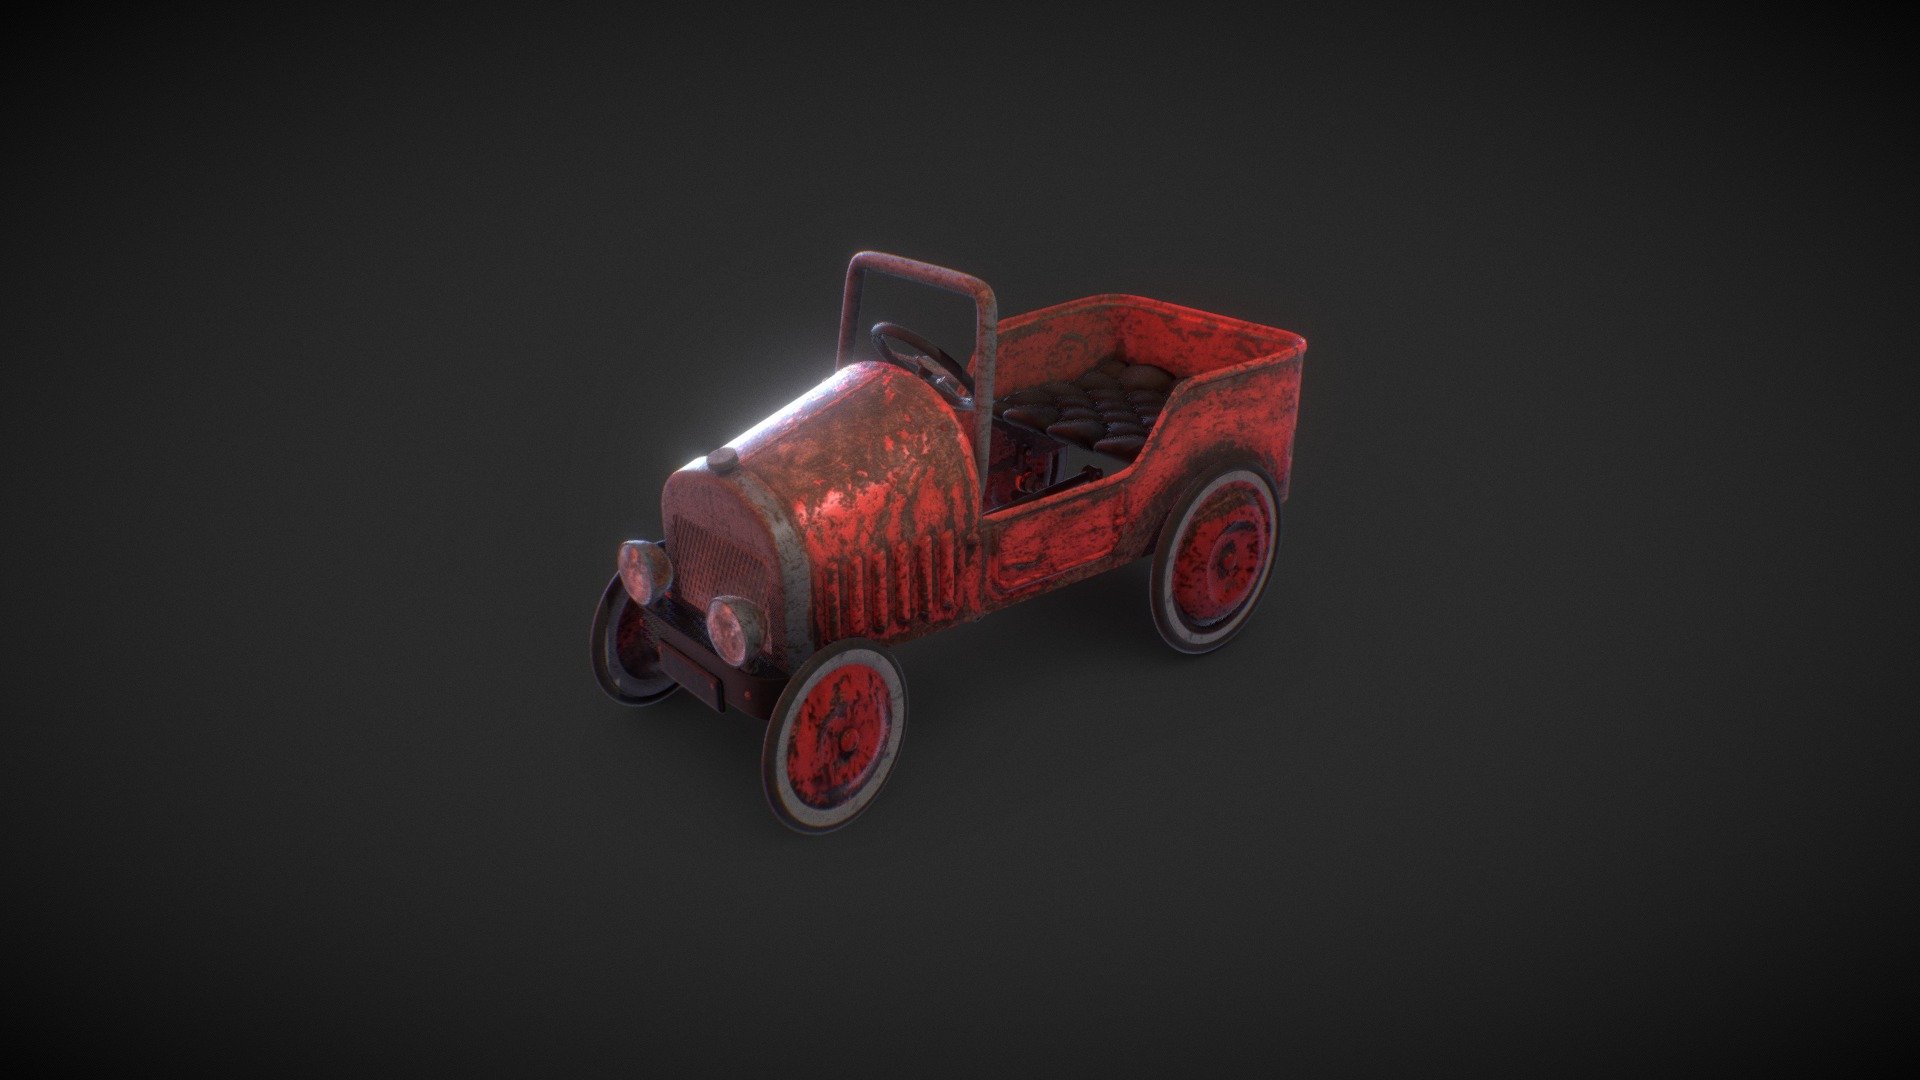 Old, forgotten by all, a rusty red pedal toy car.

Model made in Blender 2.79

Modeling time-lapse:
https://youtu.be/NRvZy8ozEeY - Rusty Pedal Toy Car - 3D model by VitSh 3d model